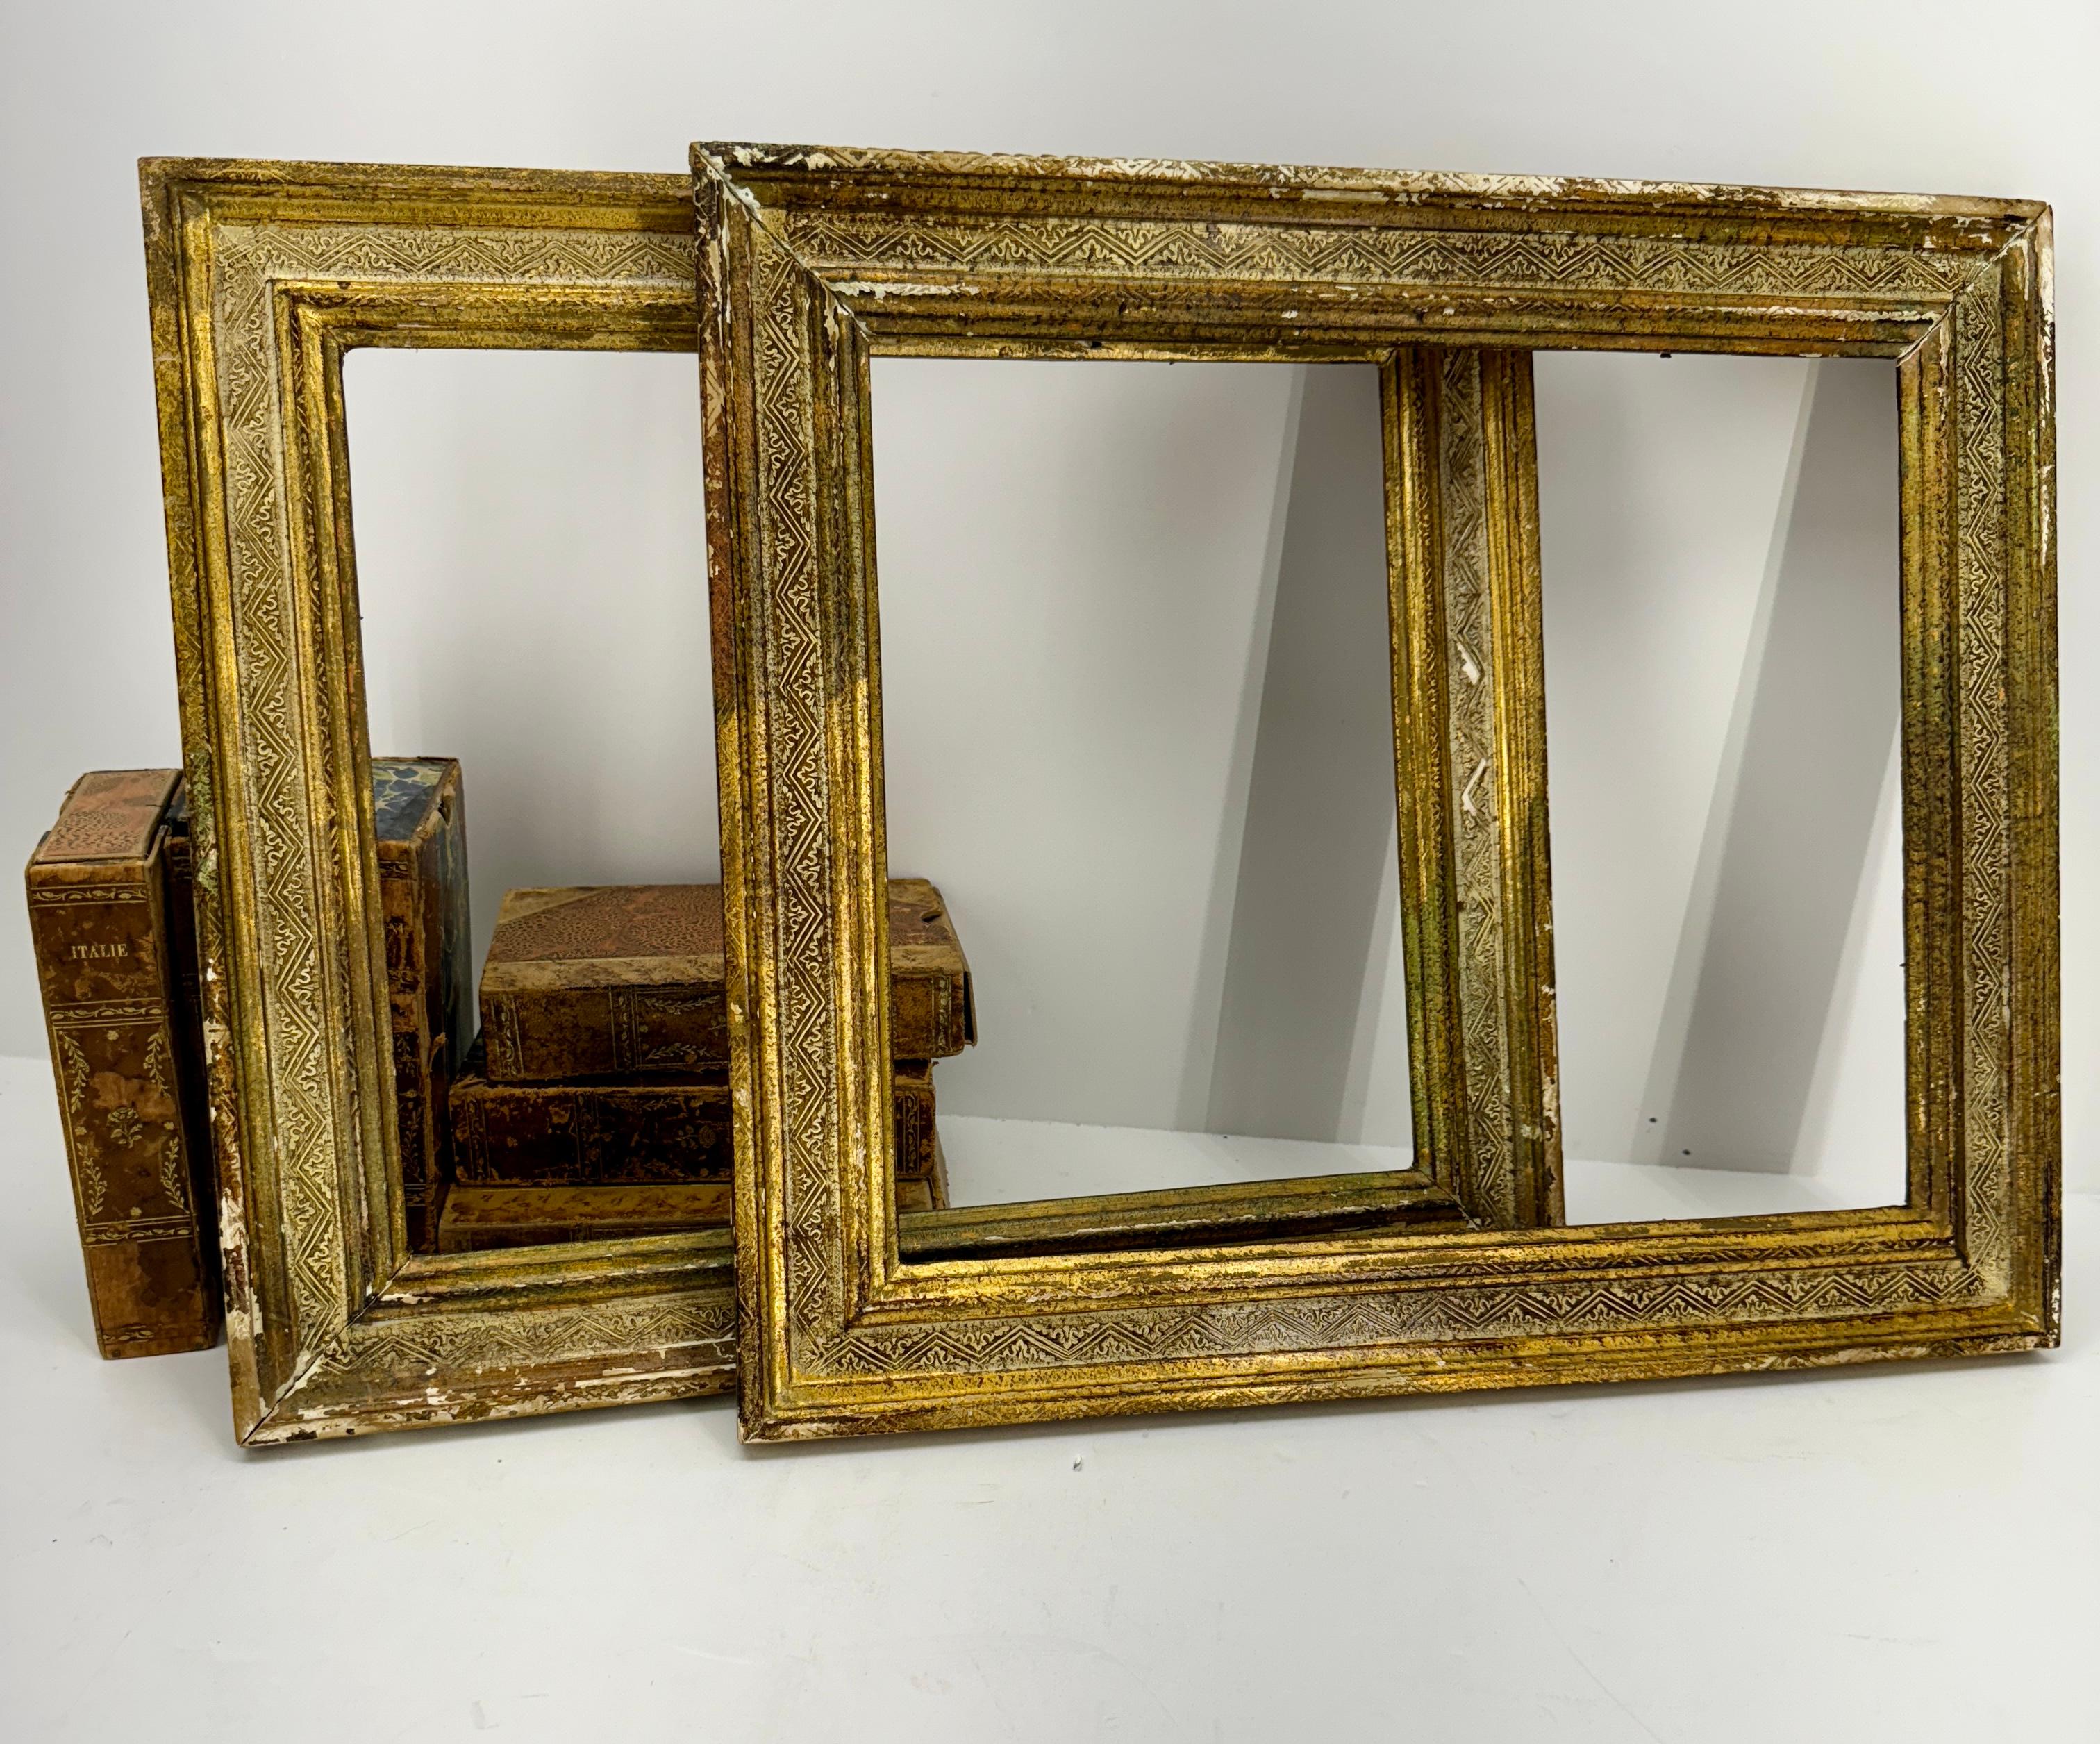 Italian Pair of Florentine Art Frames in Gilt Wood, circa 1920

These impressive detailed frames would be suitable for most style artwork including prints, watercolors as well as oil on board paintings. Please note the authentic charming label on